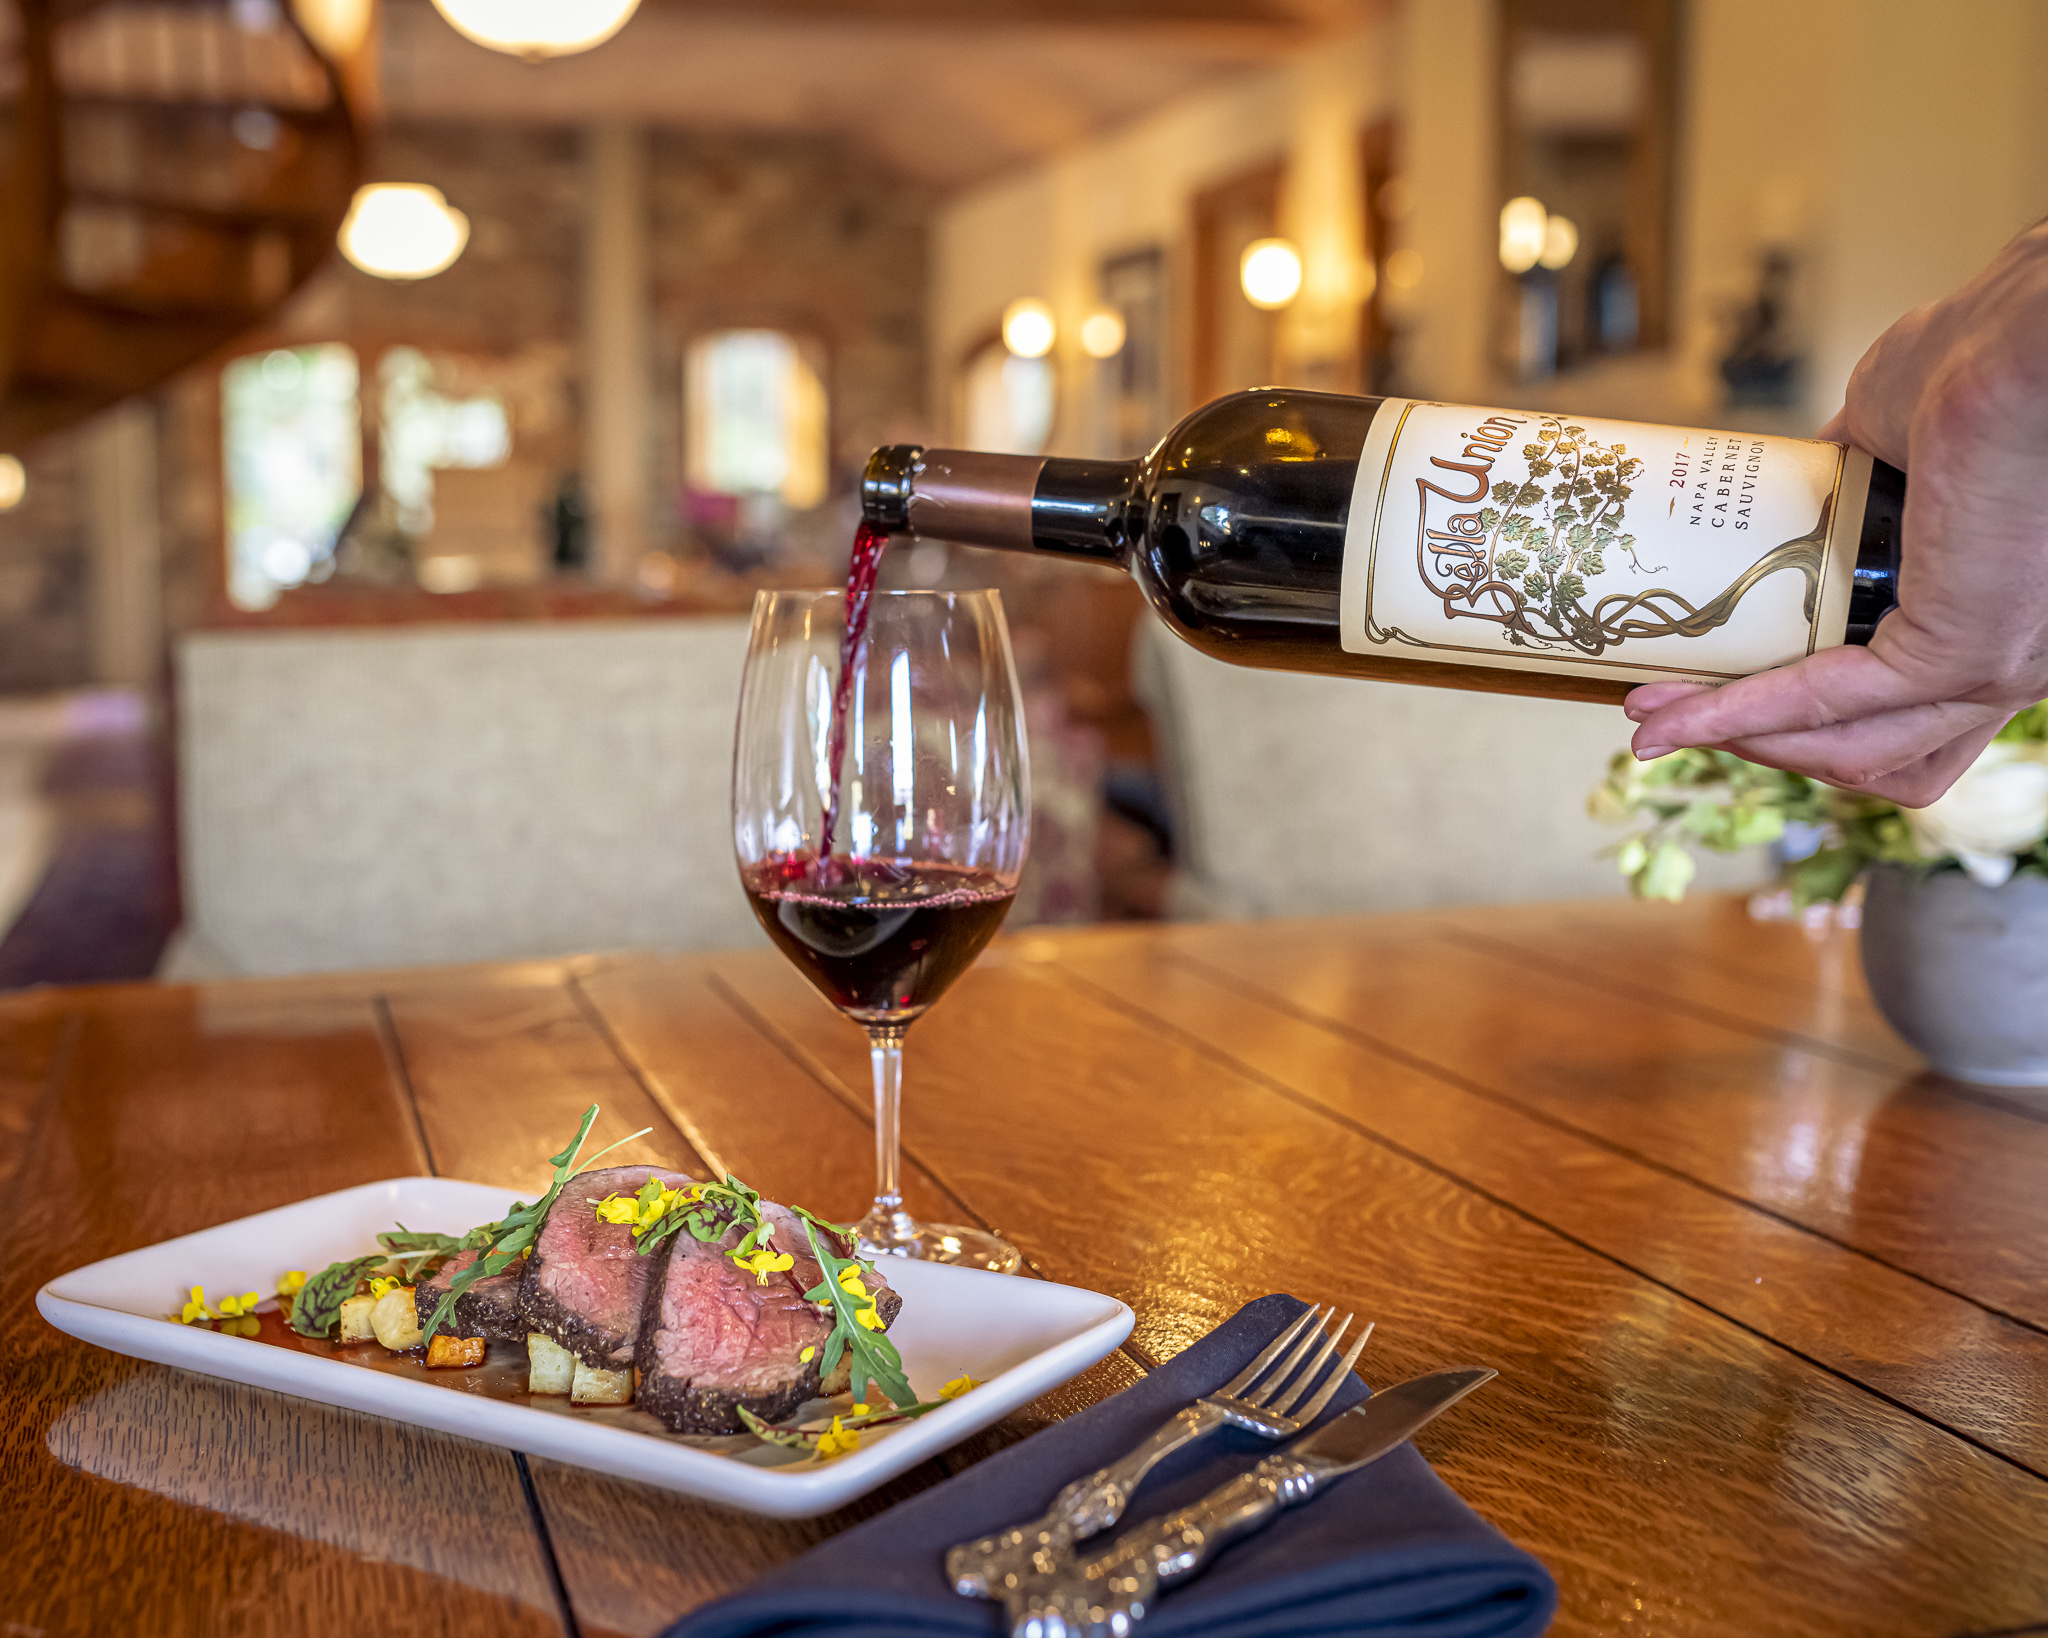 Napa Valley-Inspired Roasted Tenderloin and Cabernet